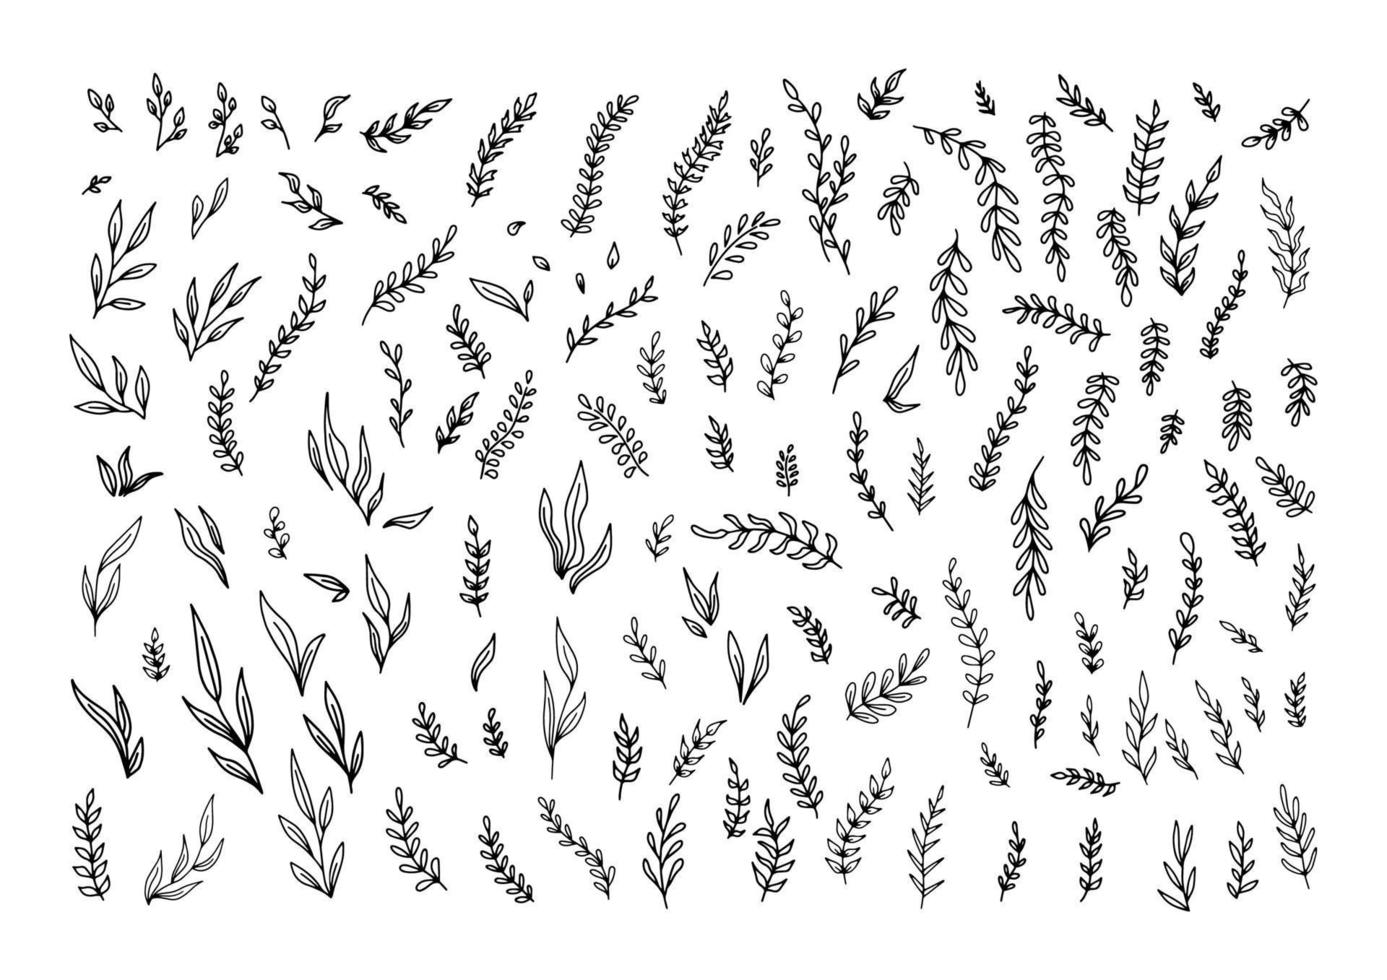 Hand Drawn cute vintage floral elements of flowers, leaves, branches, decorative plants for design background, invitations, greeting cards, logos, flyers, scrapbooking. Isolated vector on white.